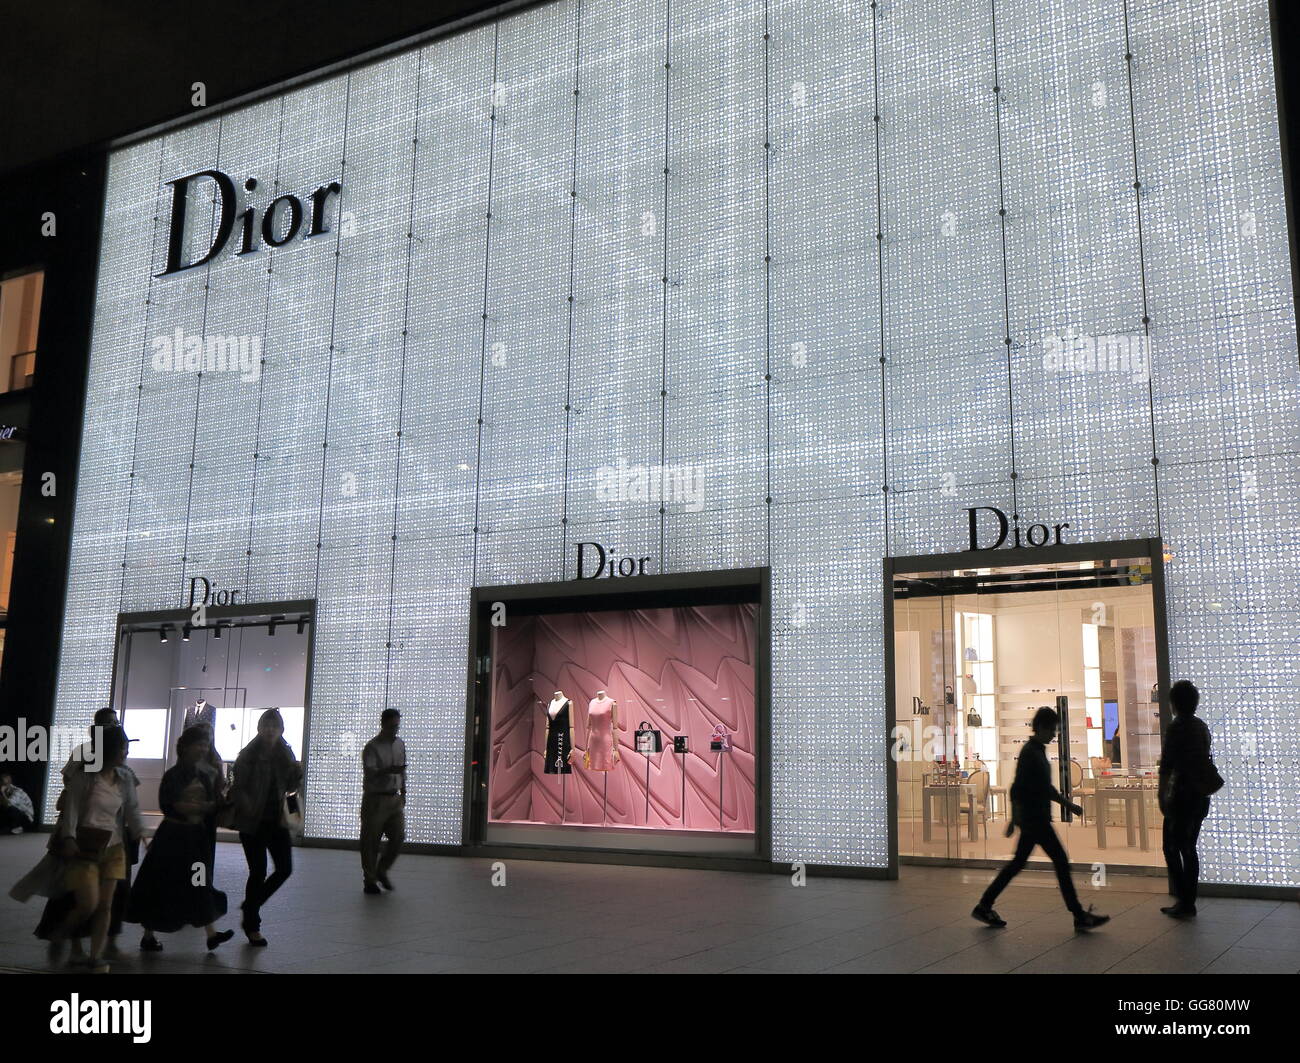 Dior shop in Nagoya Japan. French company which owns the high